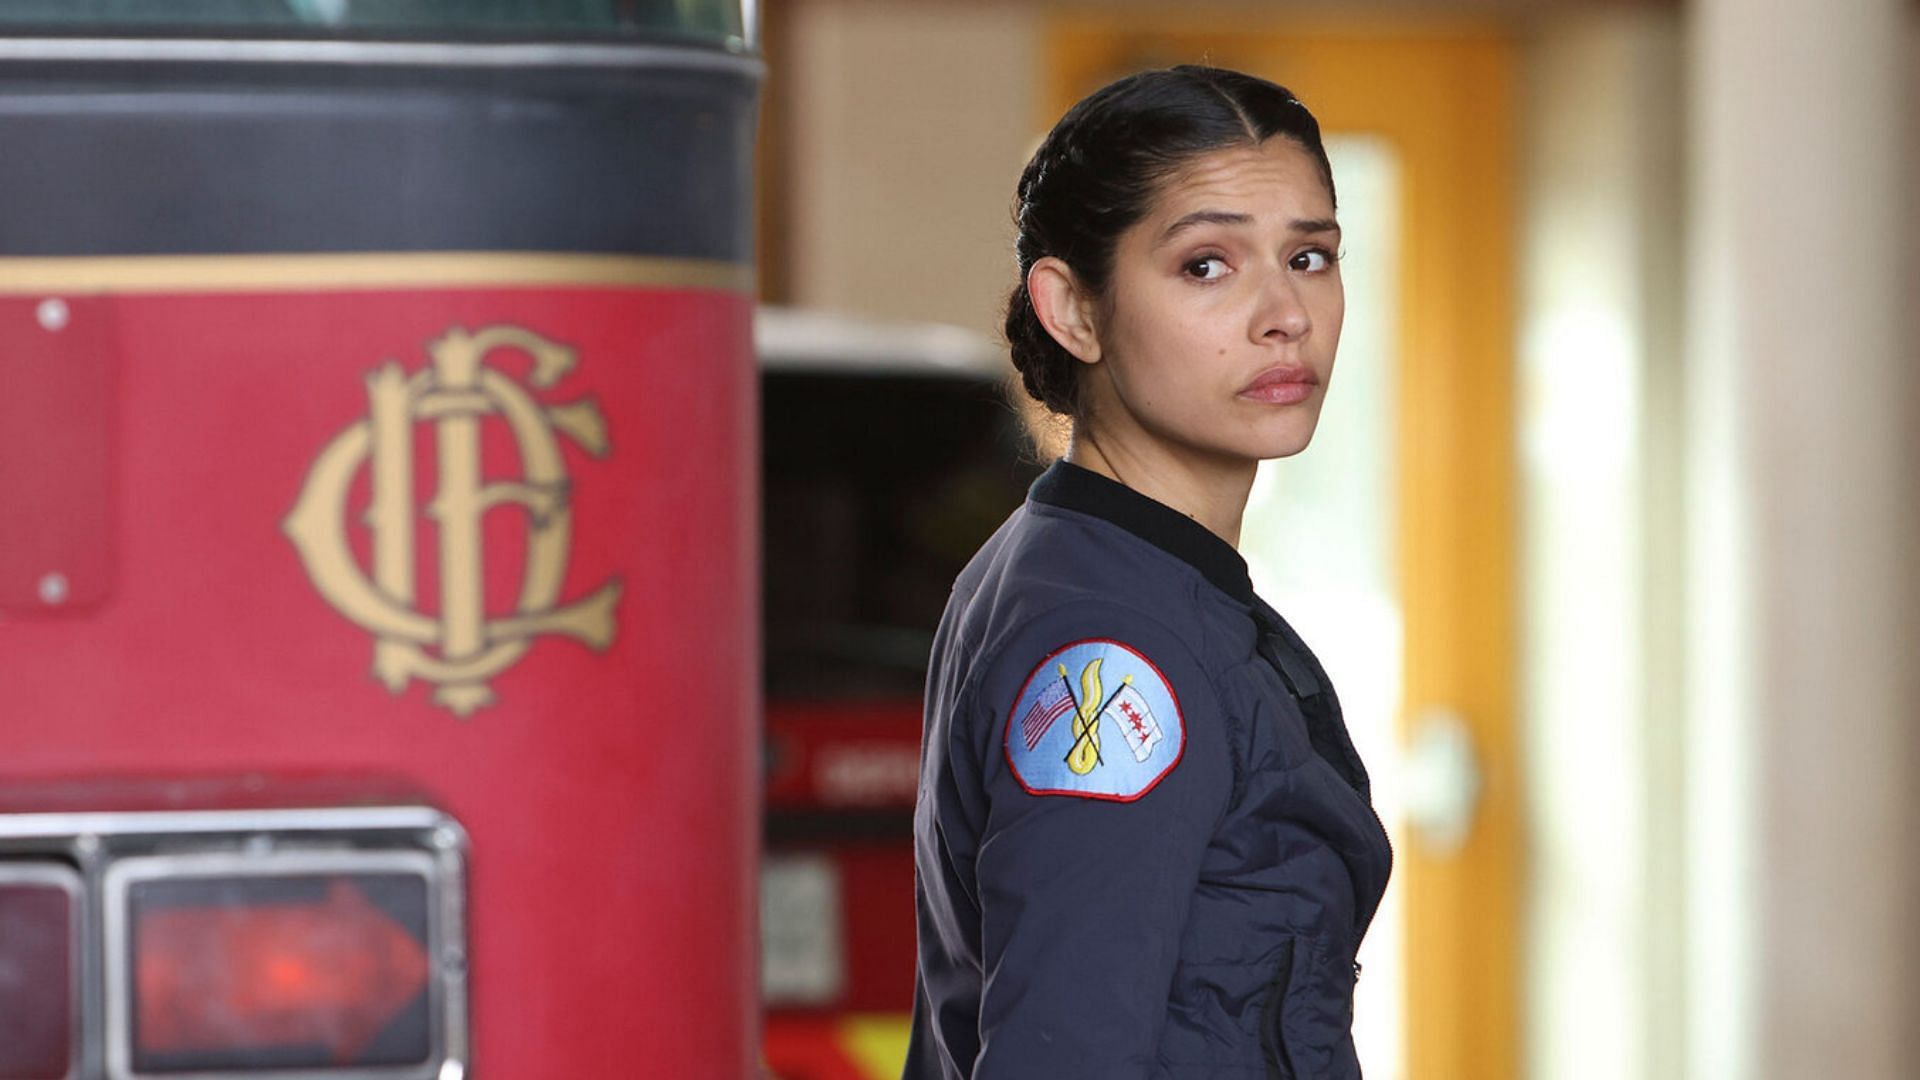 A still from Chicago Fire (image Via NBC)